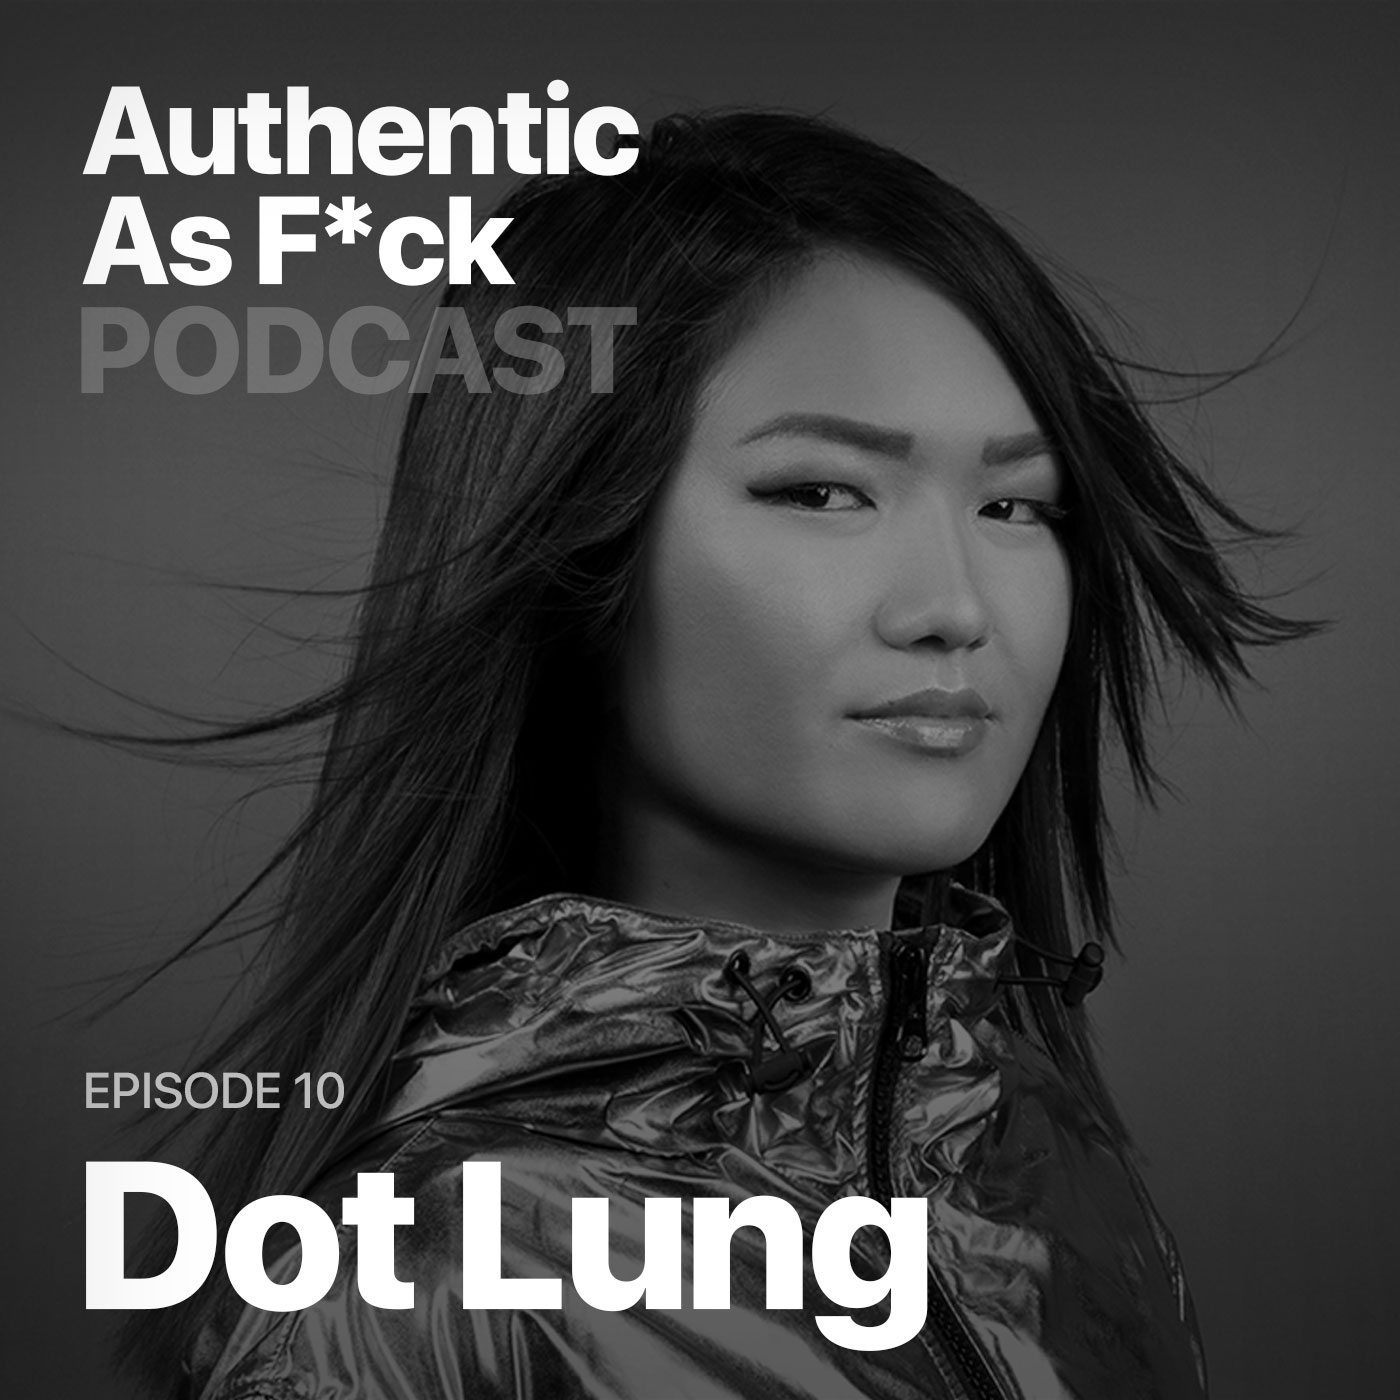 Artwork for podcast Authentic As F*ck Podcast